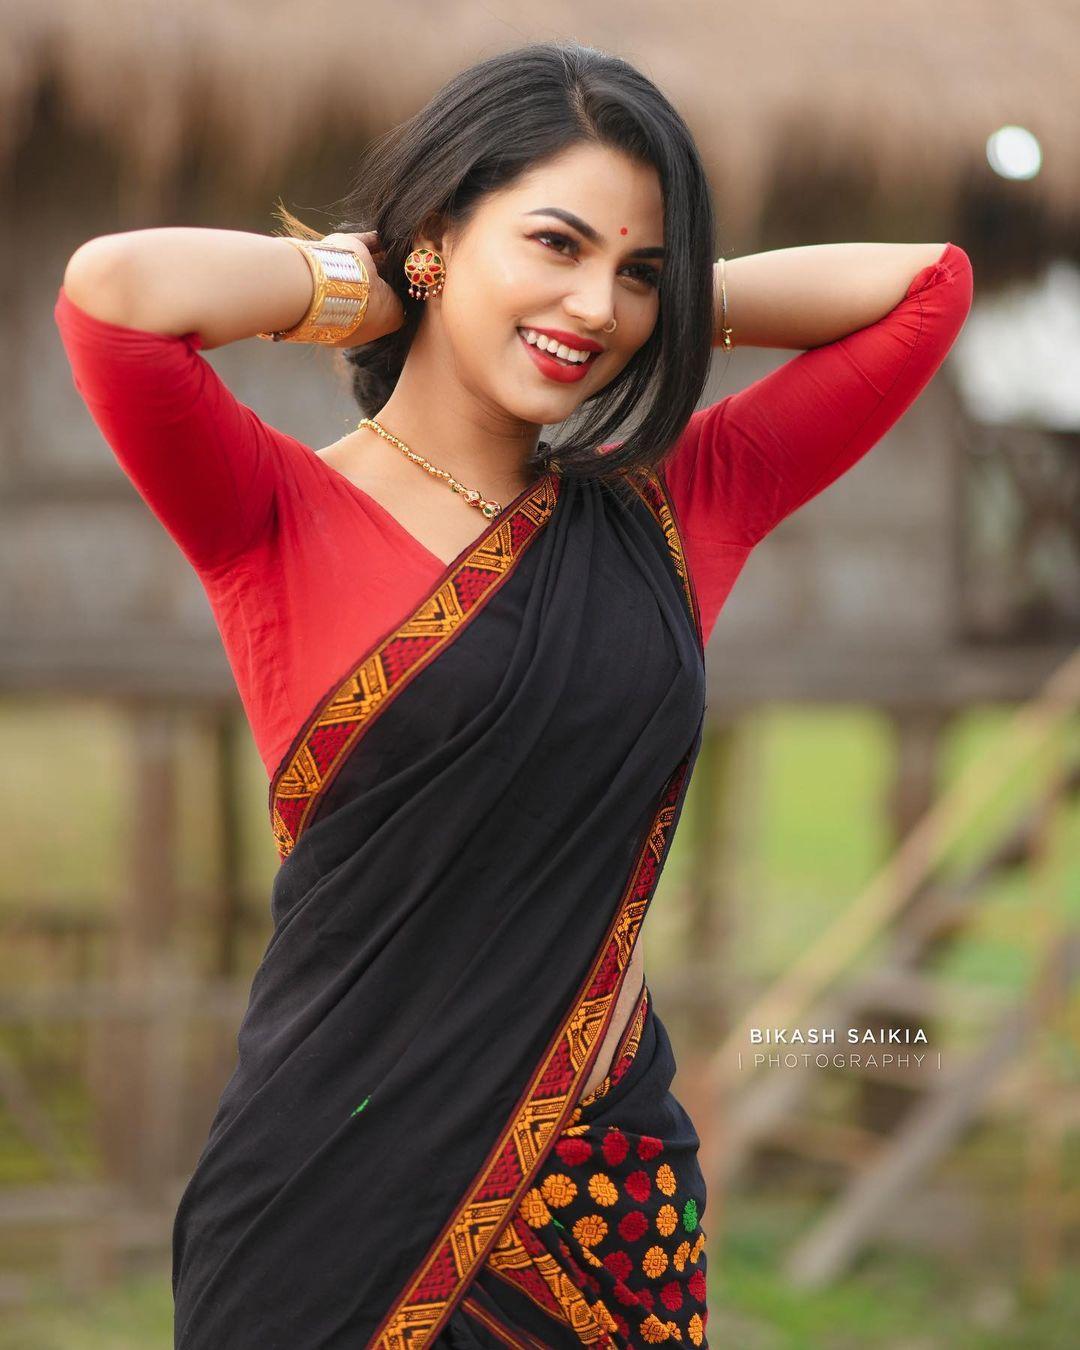 Most Sexy And Beautiful Ladys Vedeo Of Assam